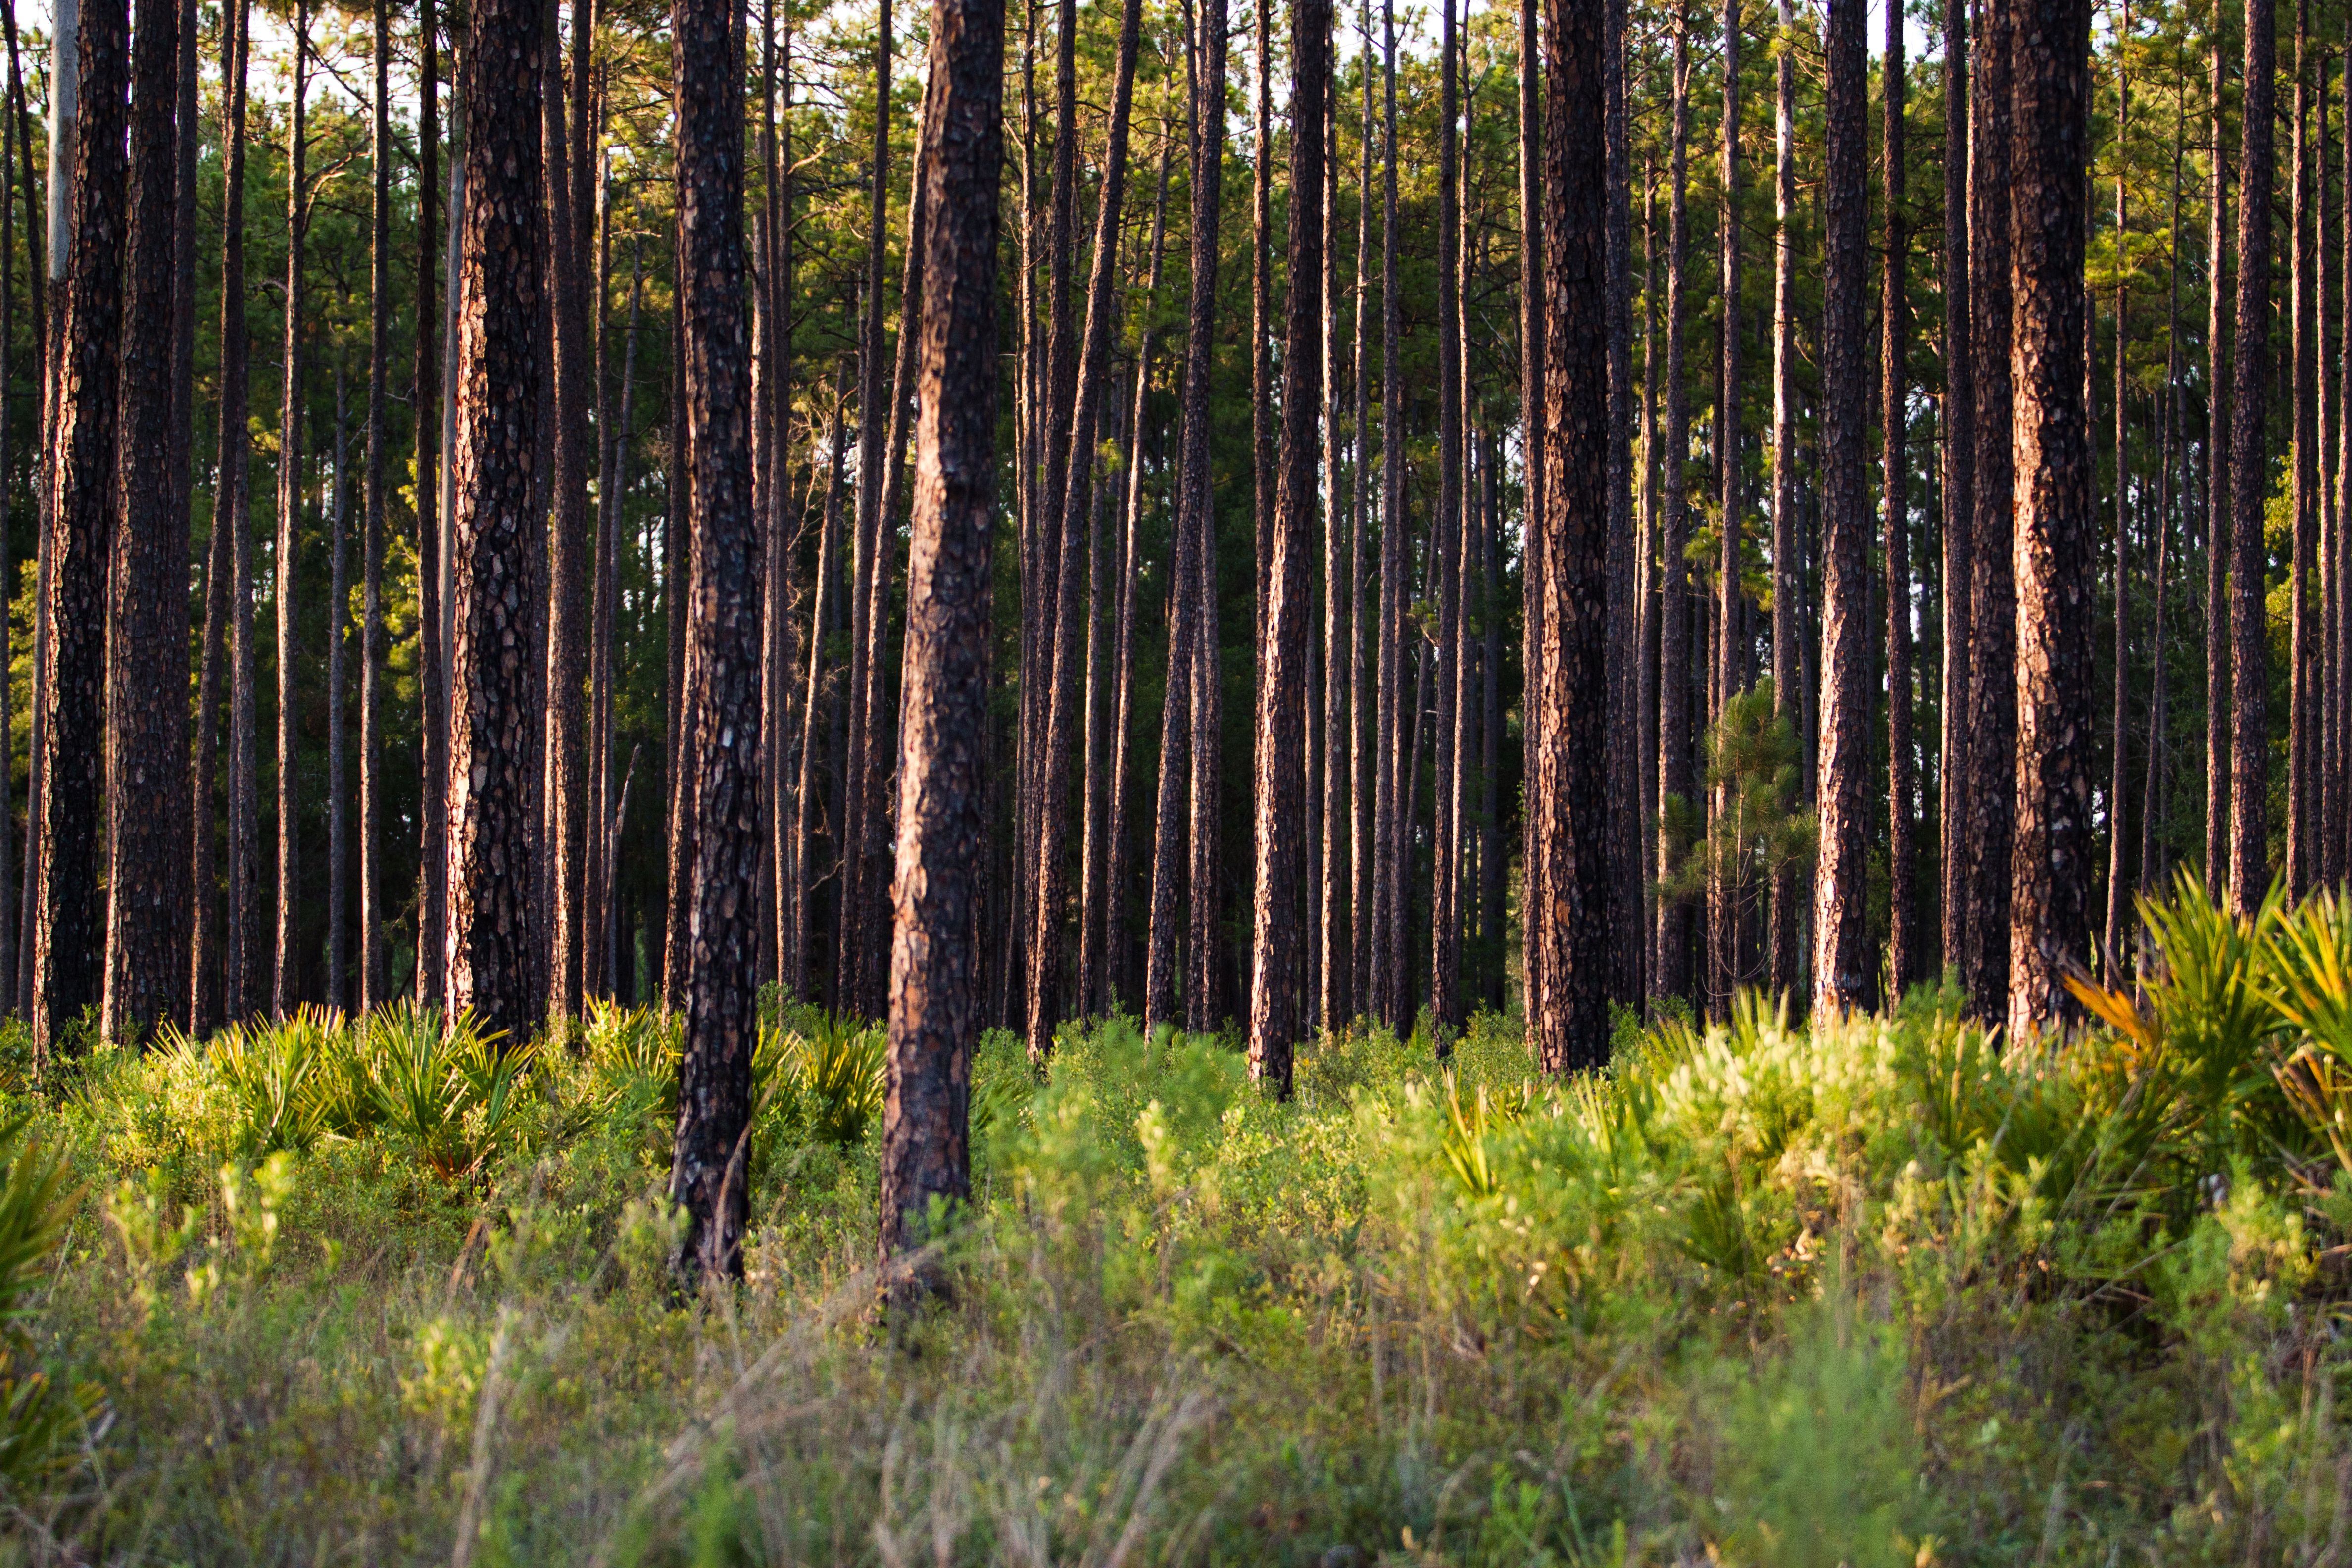 Pine flatwood forests are common throughout Florida.